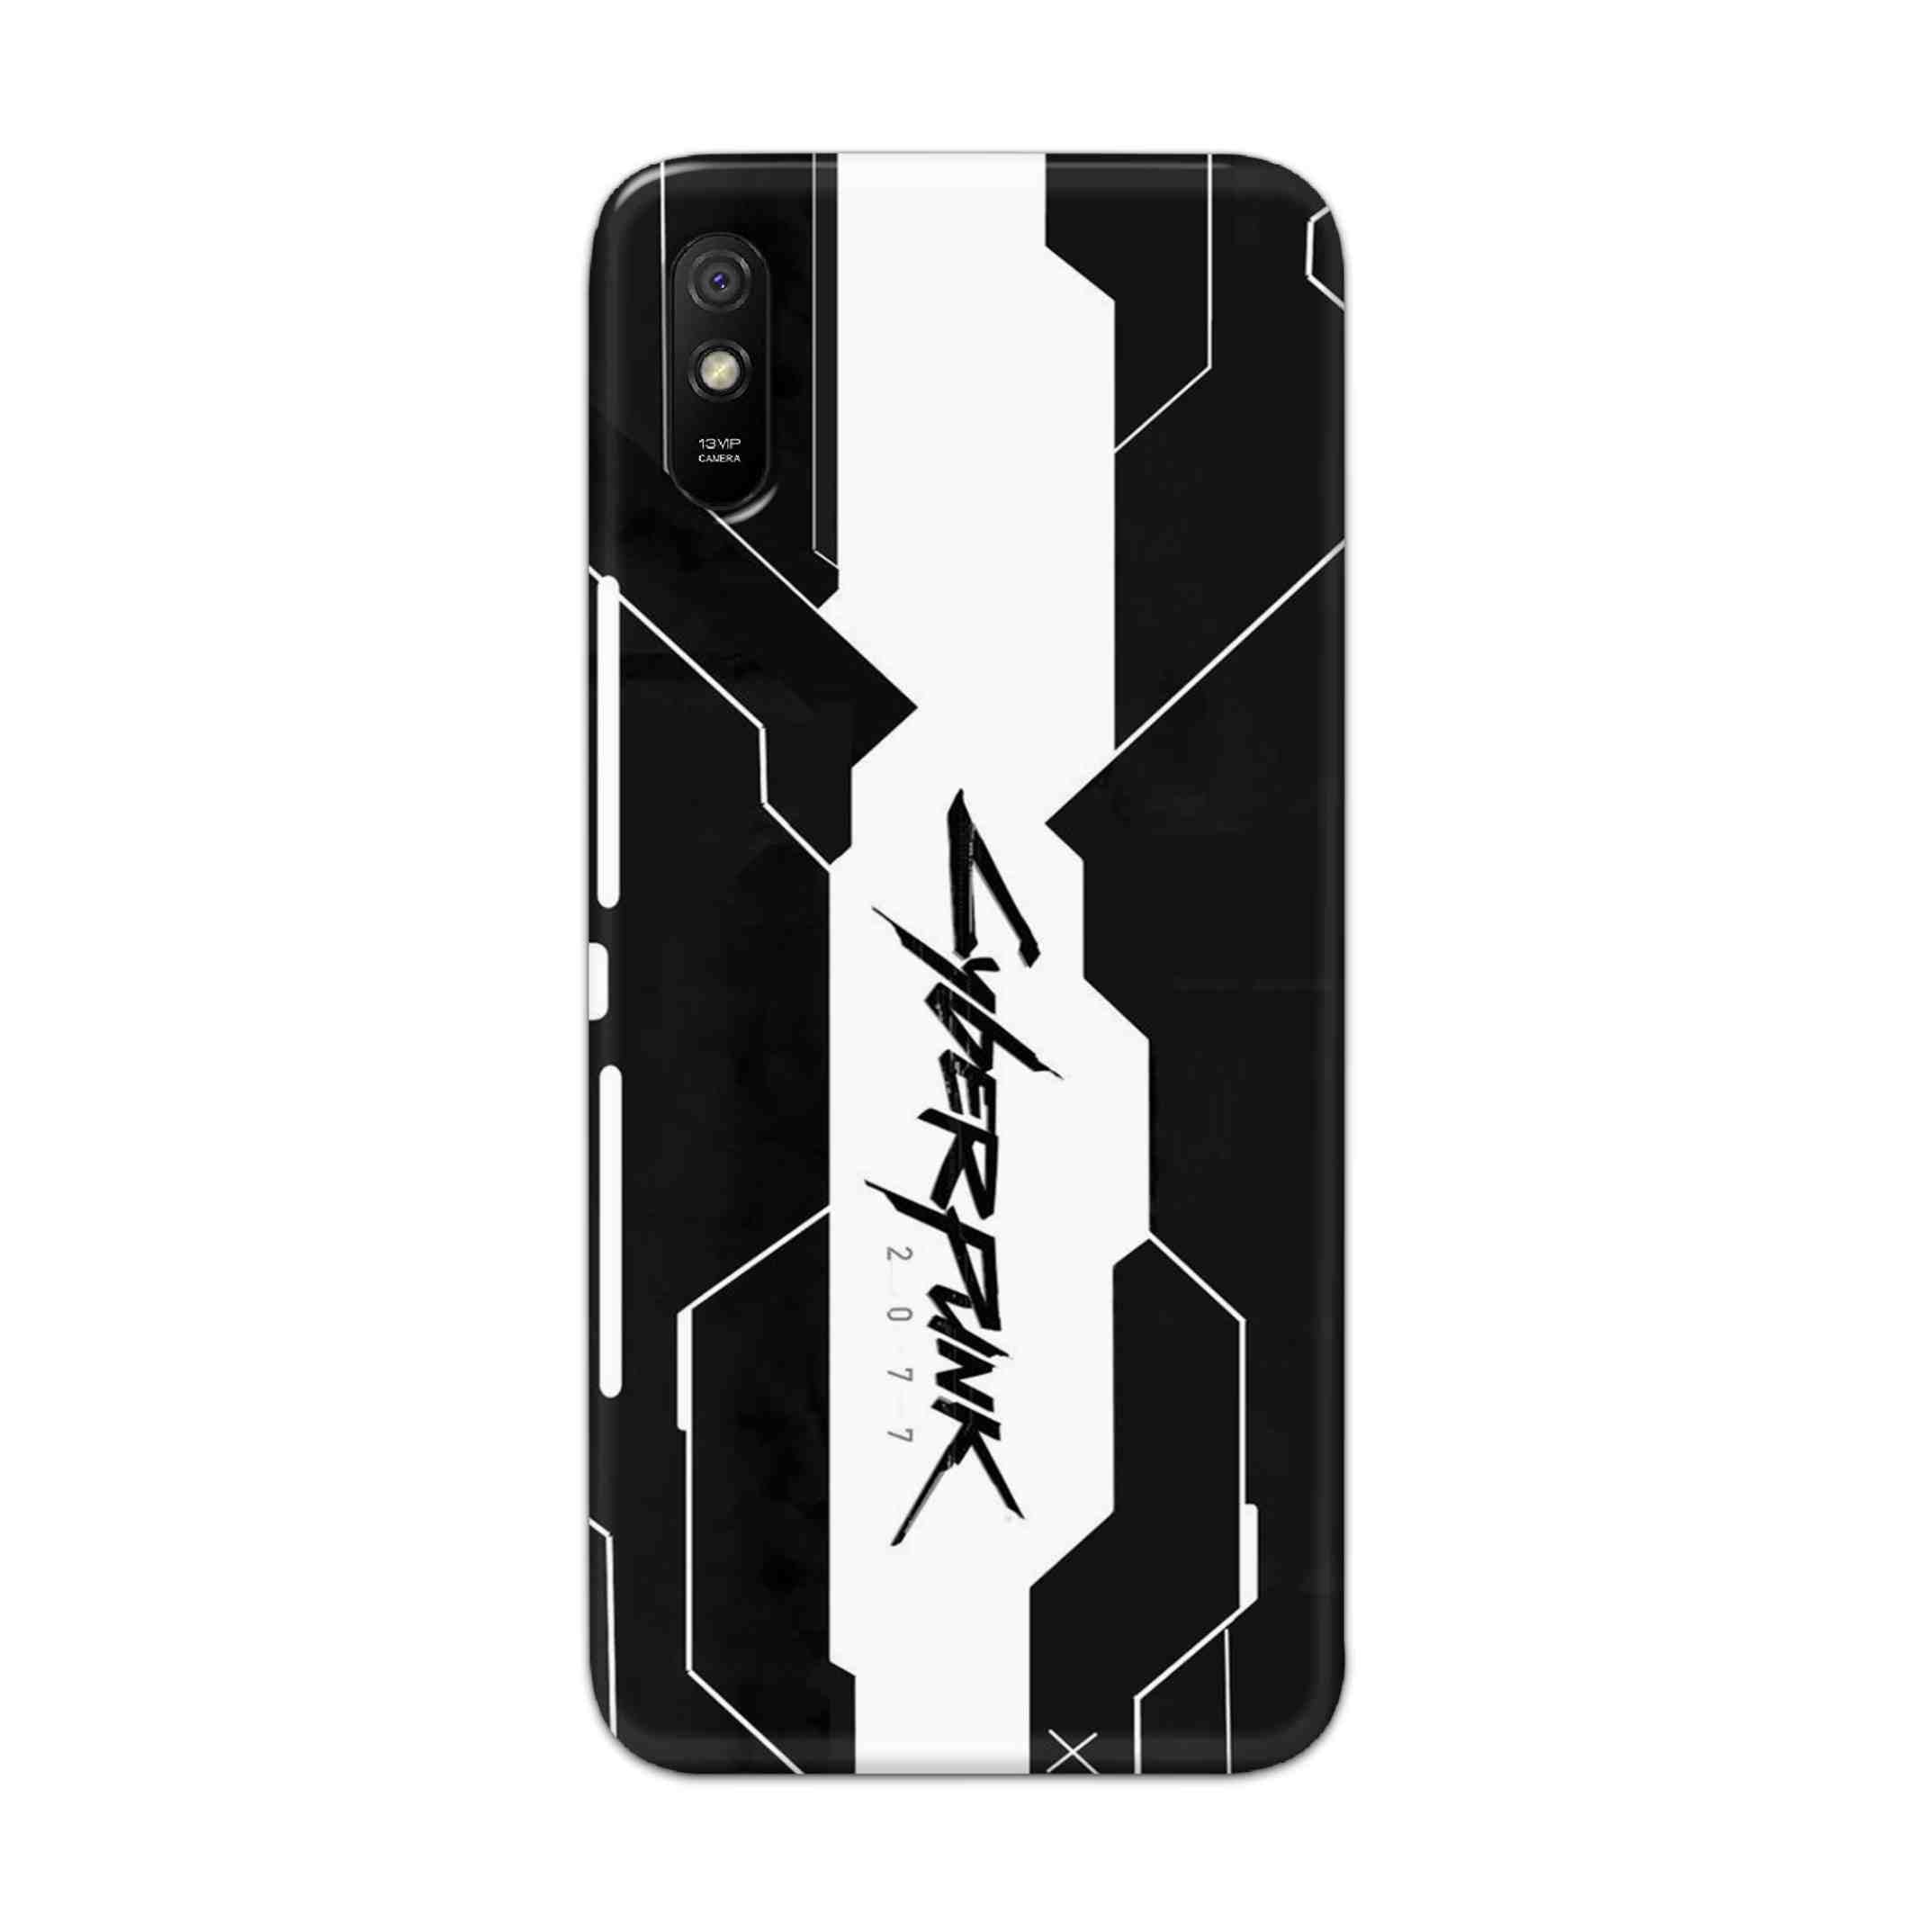 Buy Cyberpunk 2077 Art Hard Back Mobile Phone Case Cover For Redmi 9A Online